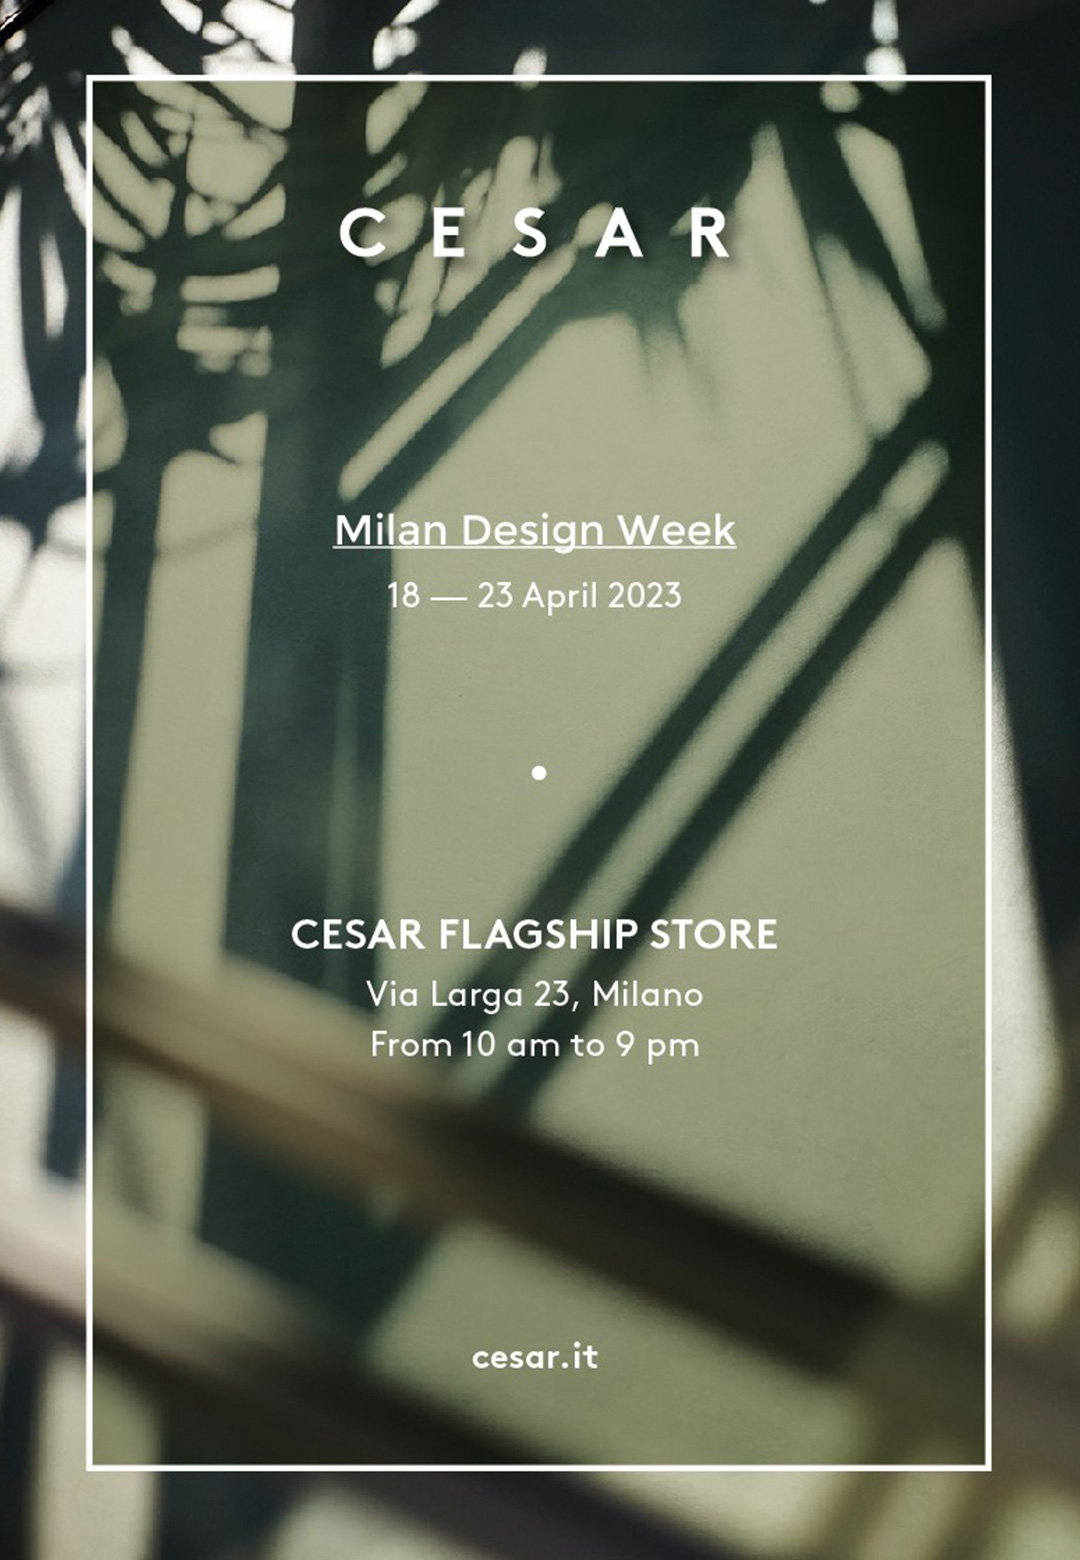 Cesar invites experiments in material and mood boards at Fuorisalone